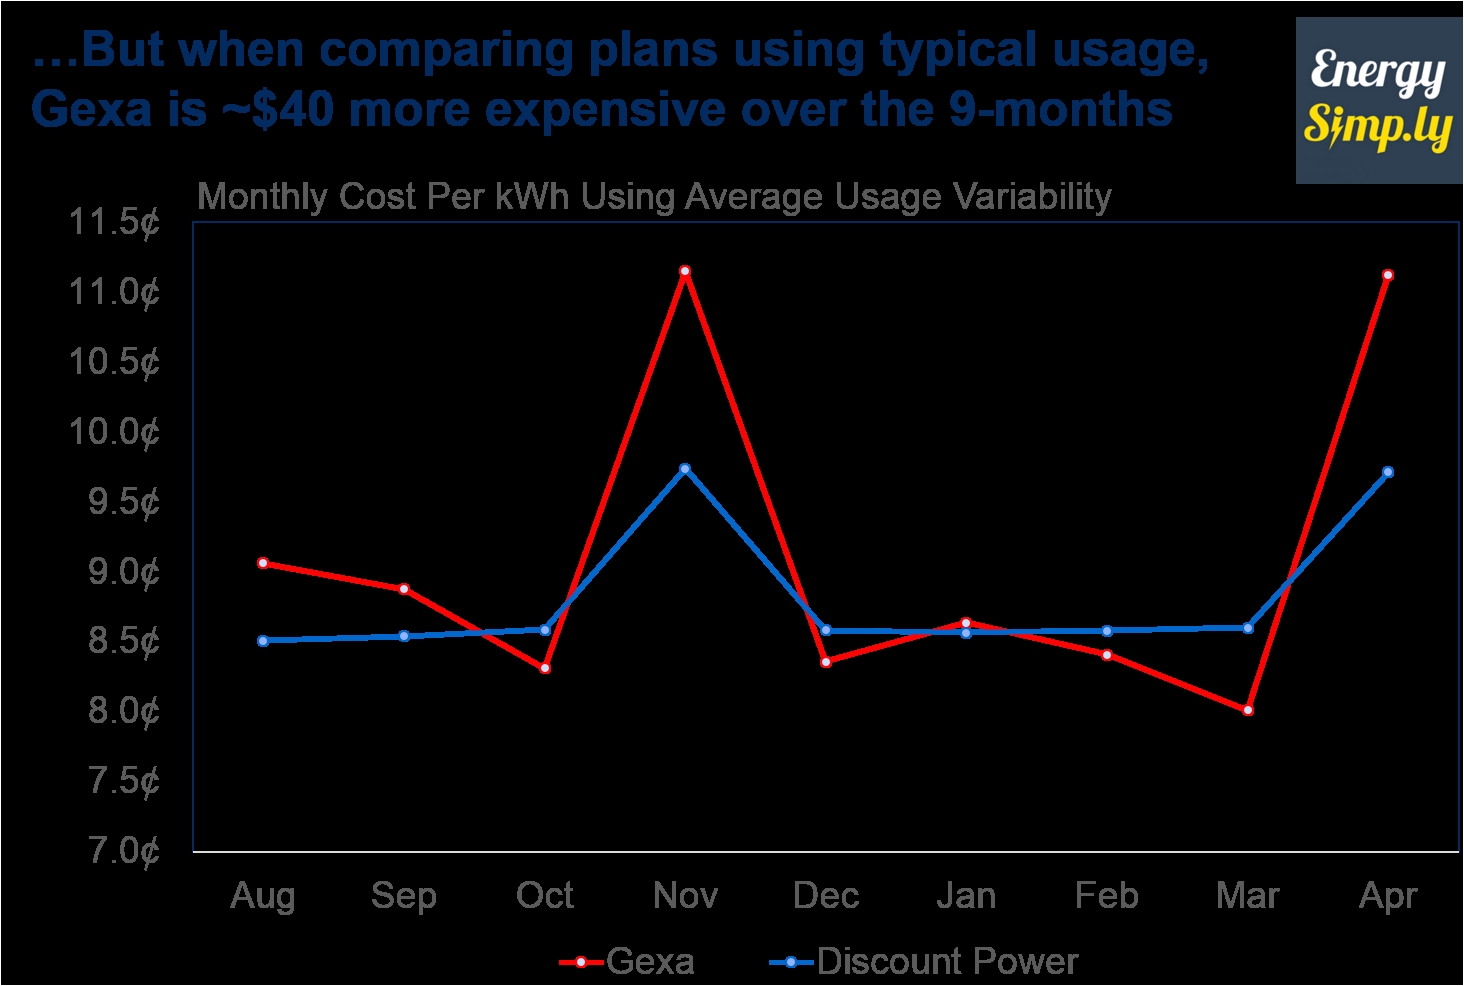 energy simply analysis using varied monthly usage of a typical household shows 4change much cheaper